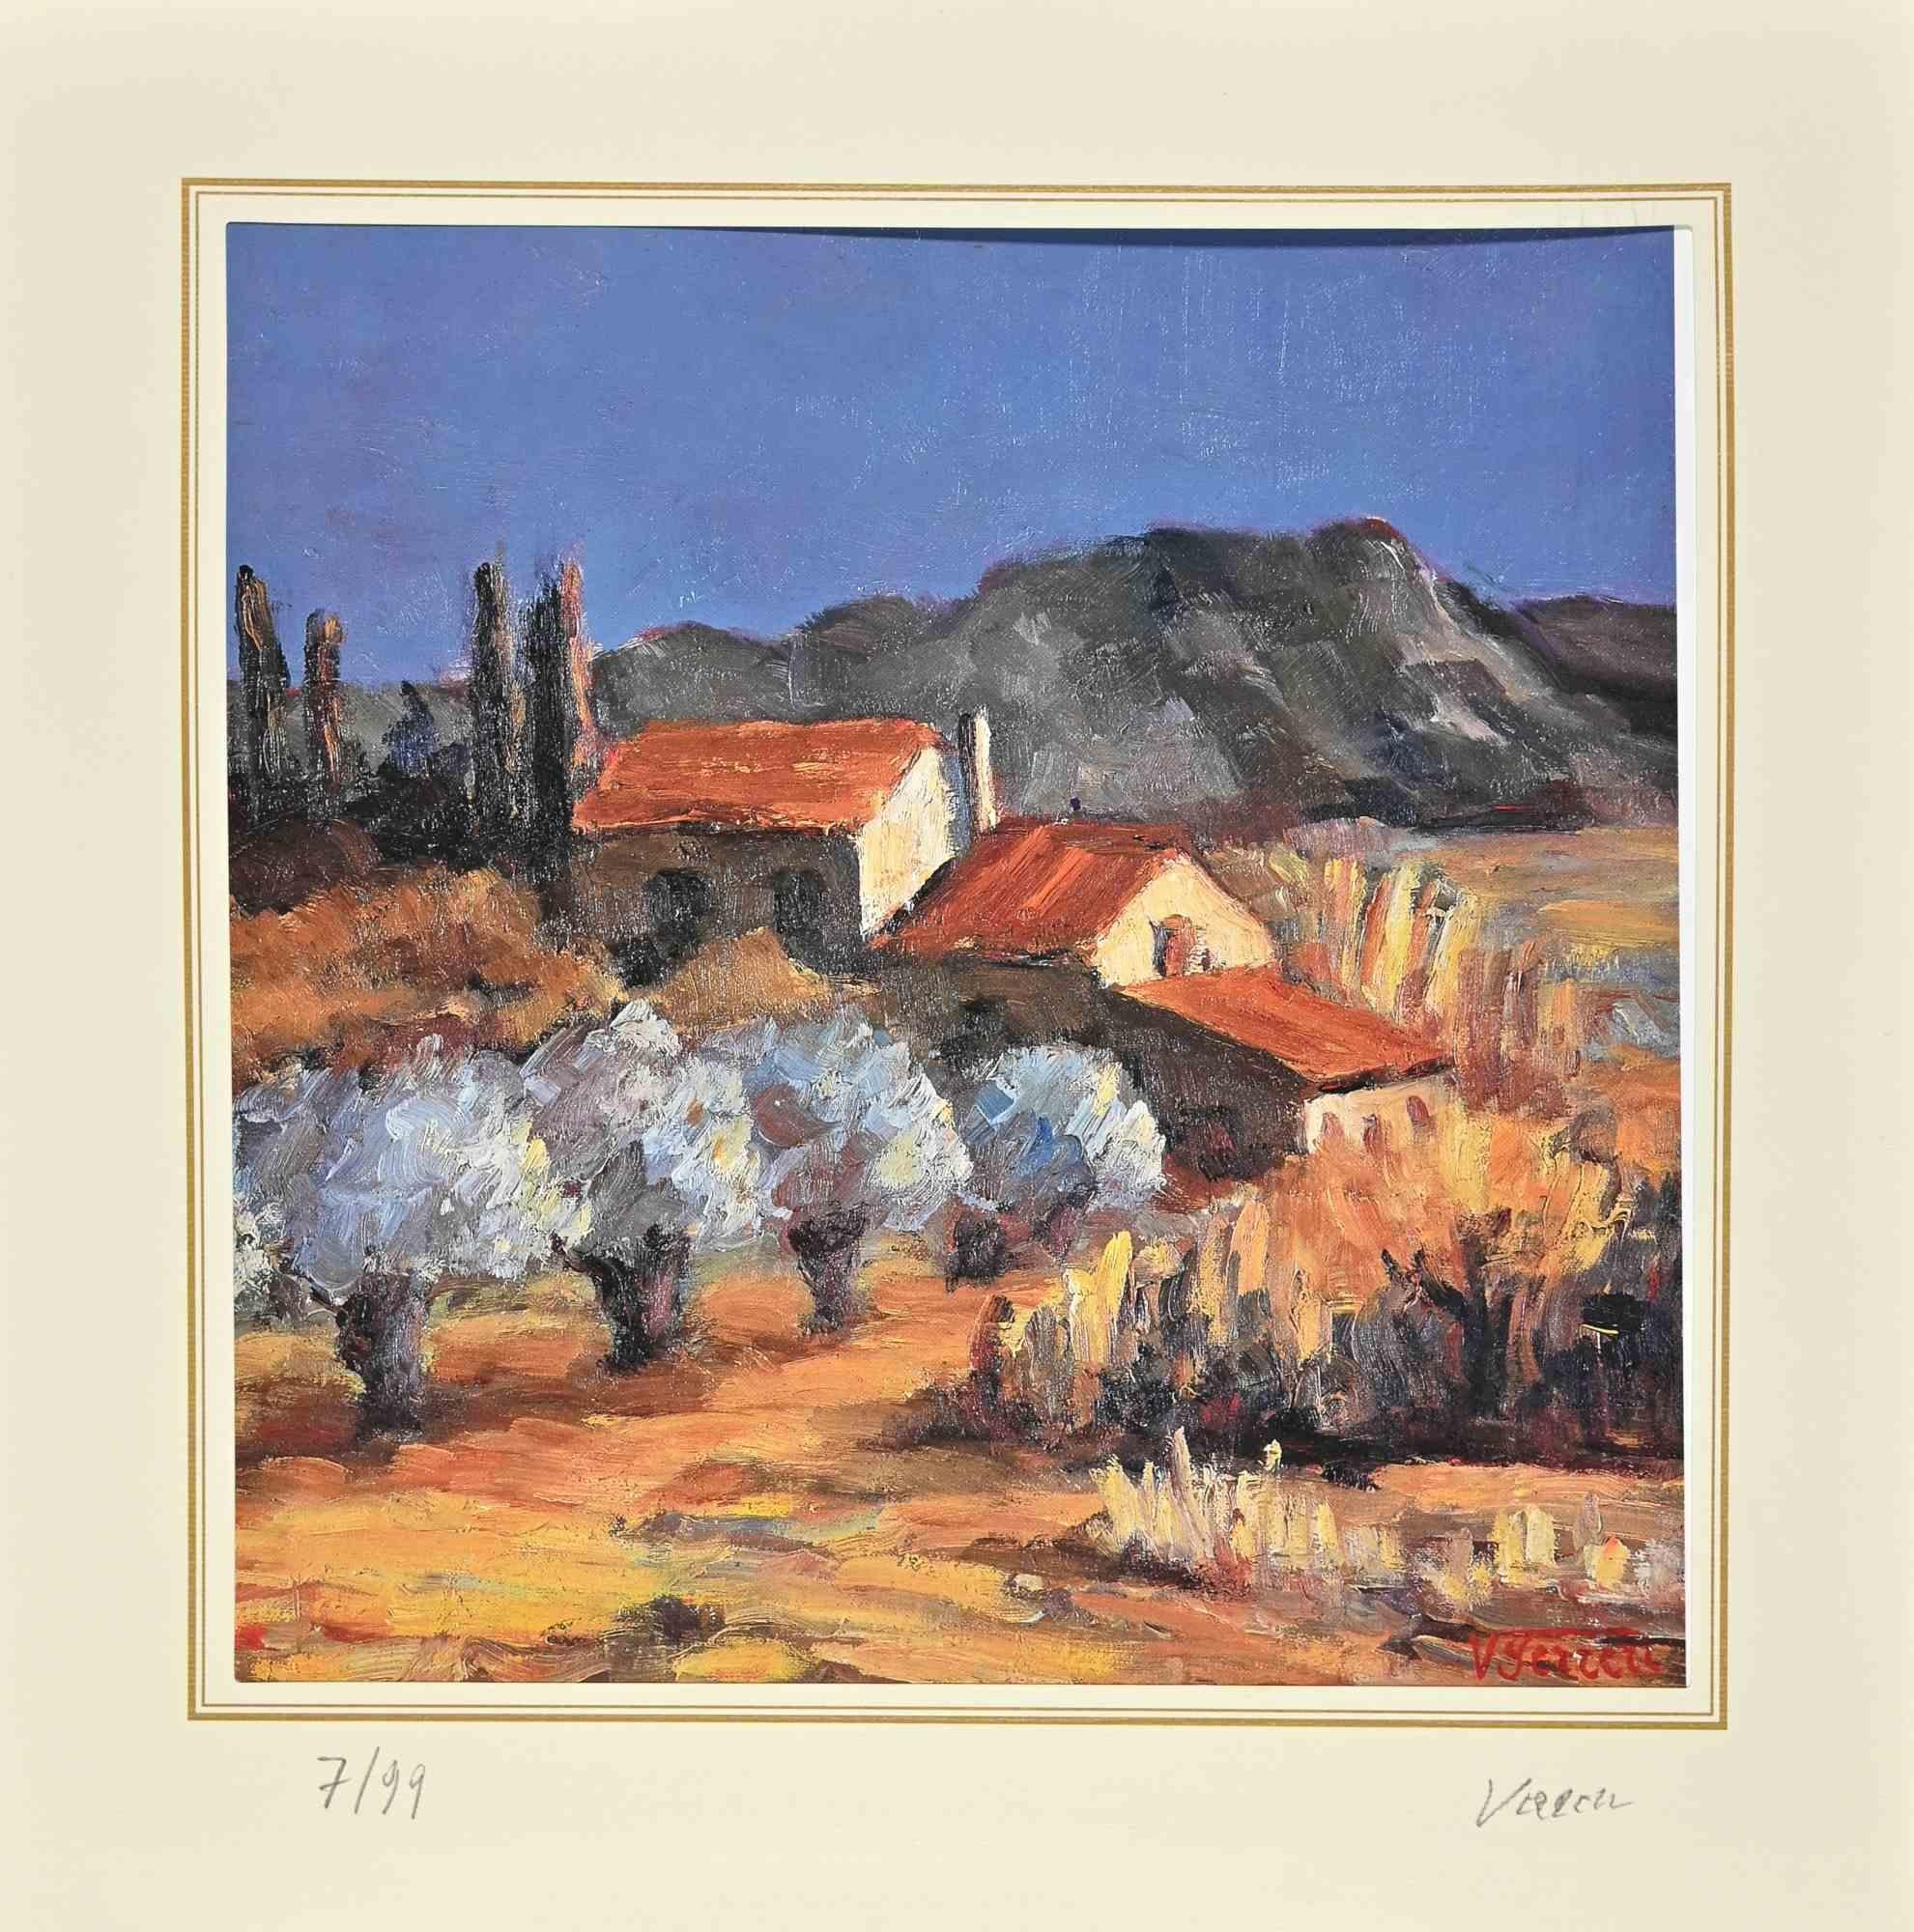 Landscape is a lithograph attributed to Nicholas Verrall (1945)  in the Late 20th Century.

Hand-signed on the right corner. Numbered, Edition, 7/99, on the left margin. On the back is the label of the certificate of  authenticity.

The artwork is